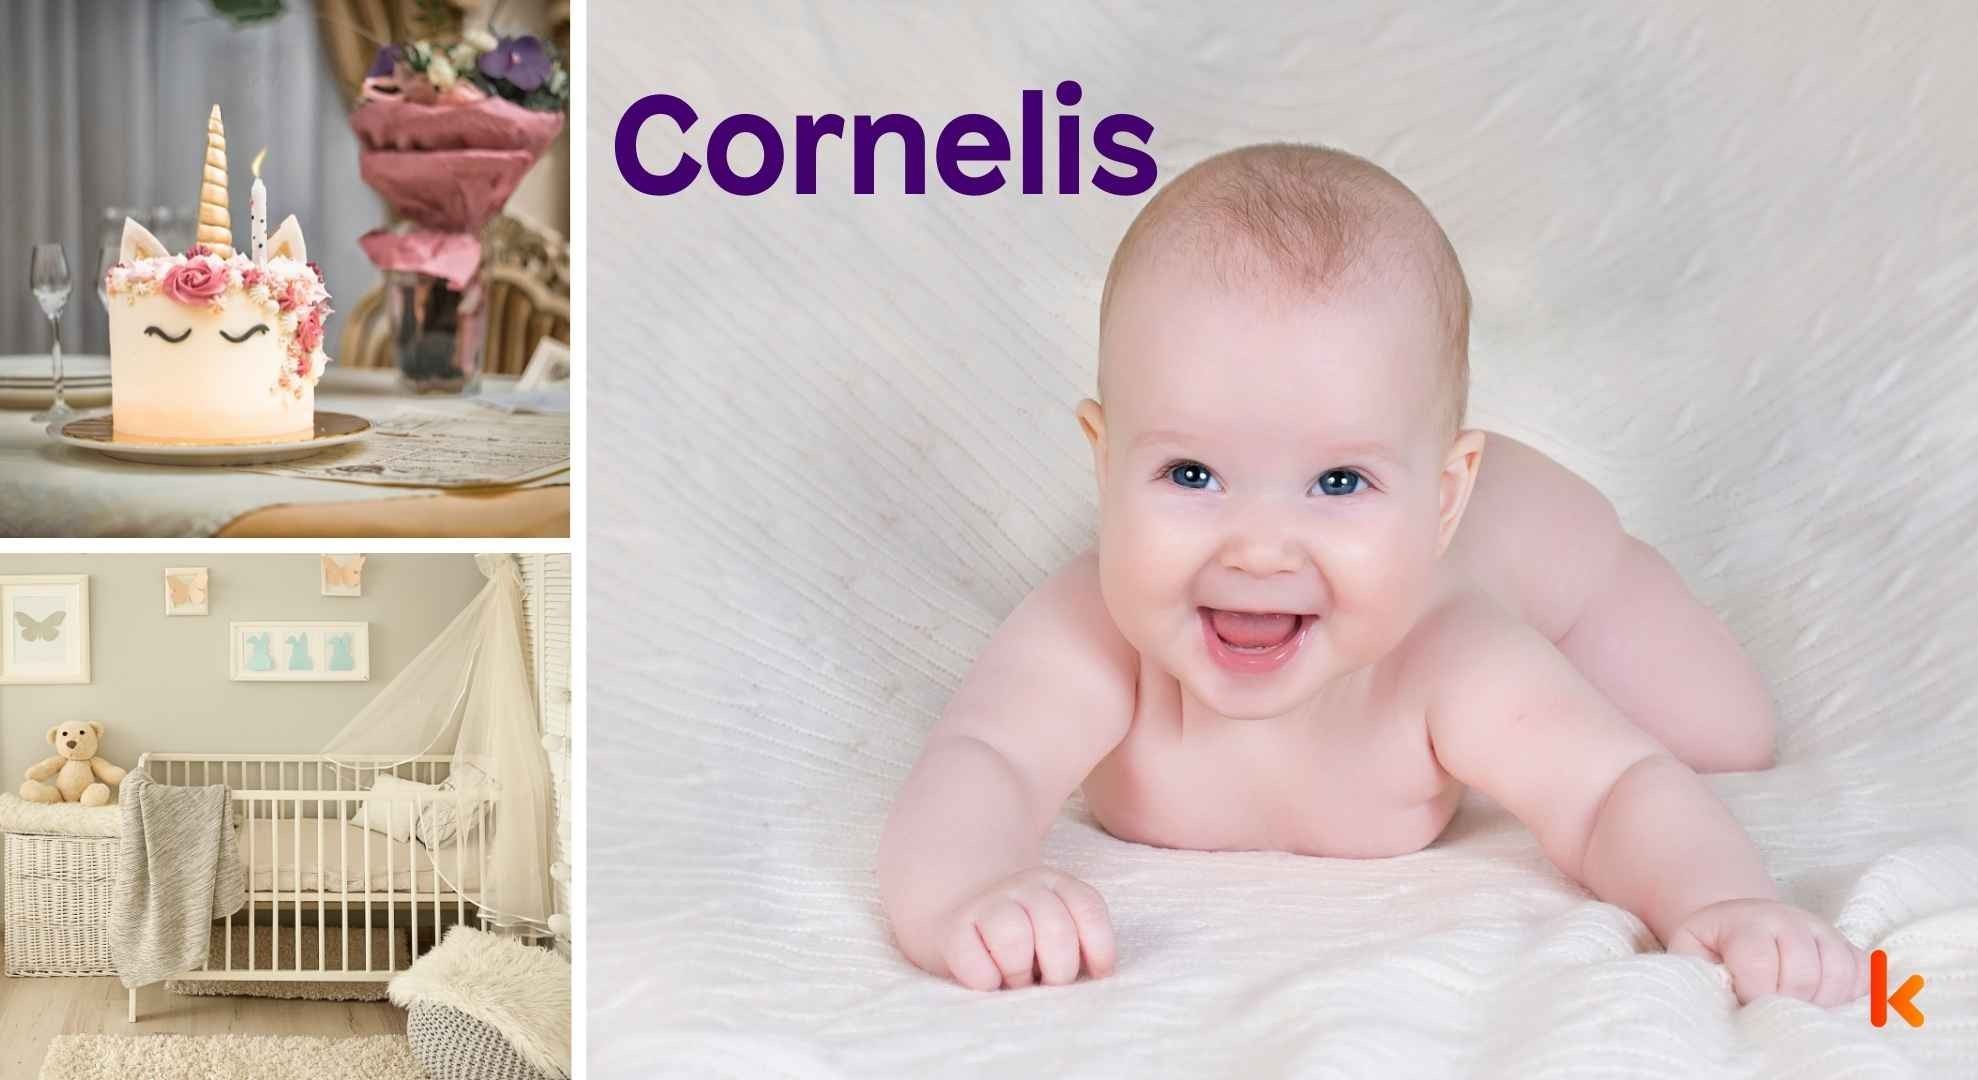 Meaning of the name Cornelis